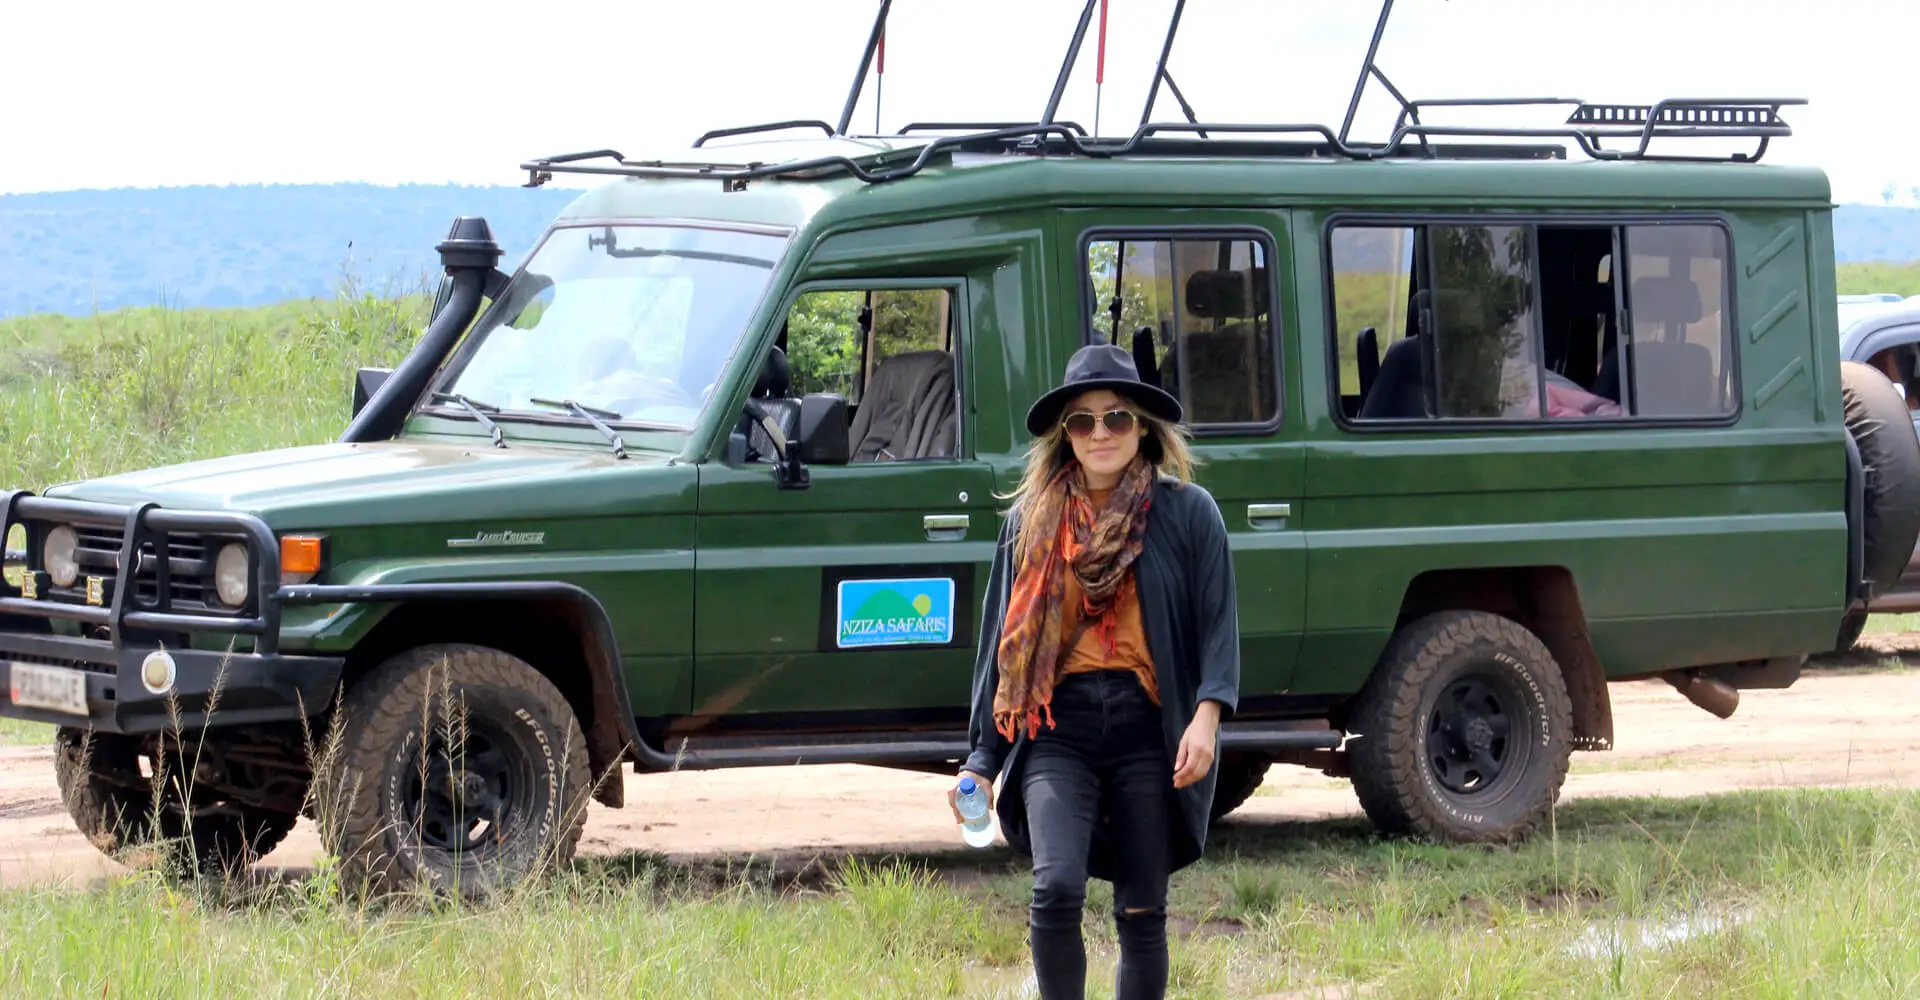 SAFARI CARS: Renowned for their ruggedness and versatility, safari cars are specially equipped vehicles designed for wildlife expeditions and adventurous journeys. They offer ample space, durability, and off-road capabilities. - Rent Car Rwanda